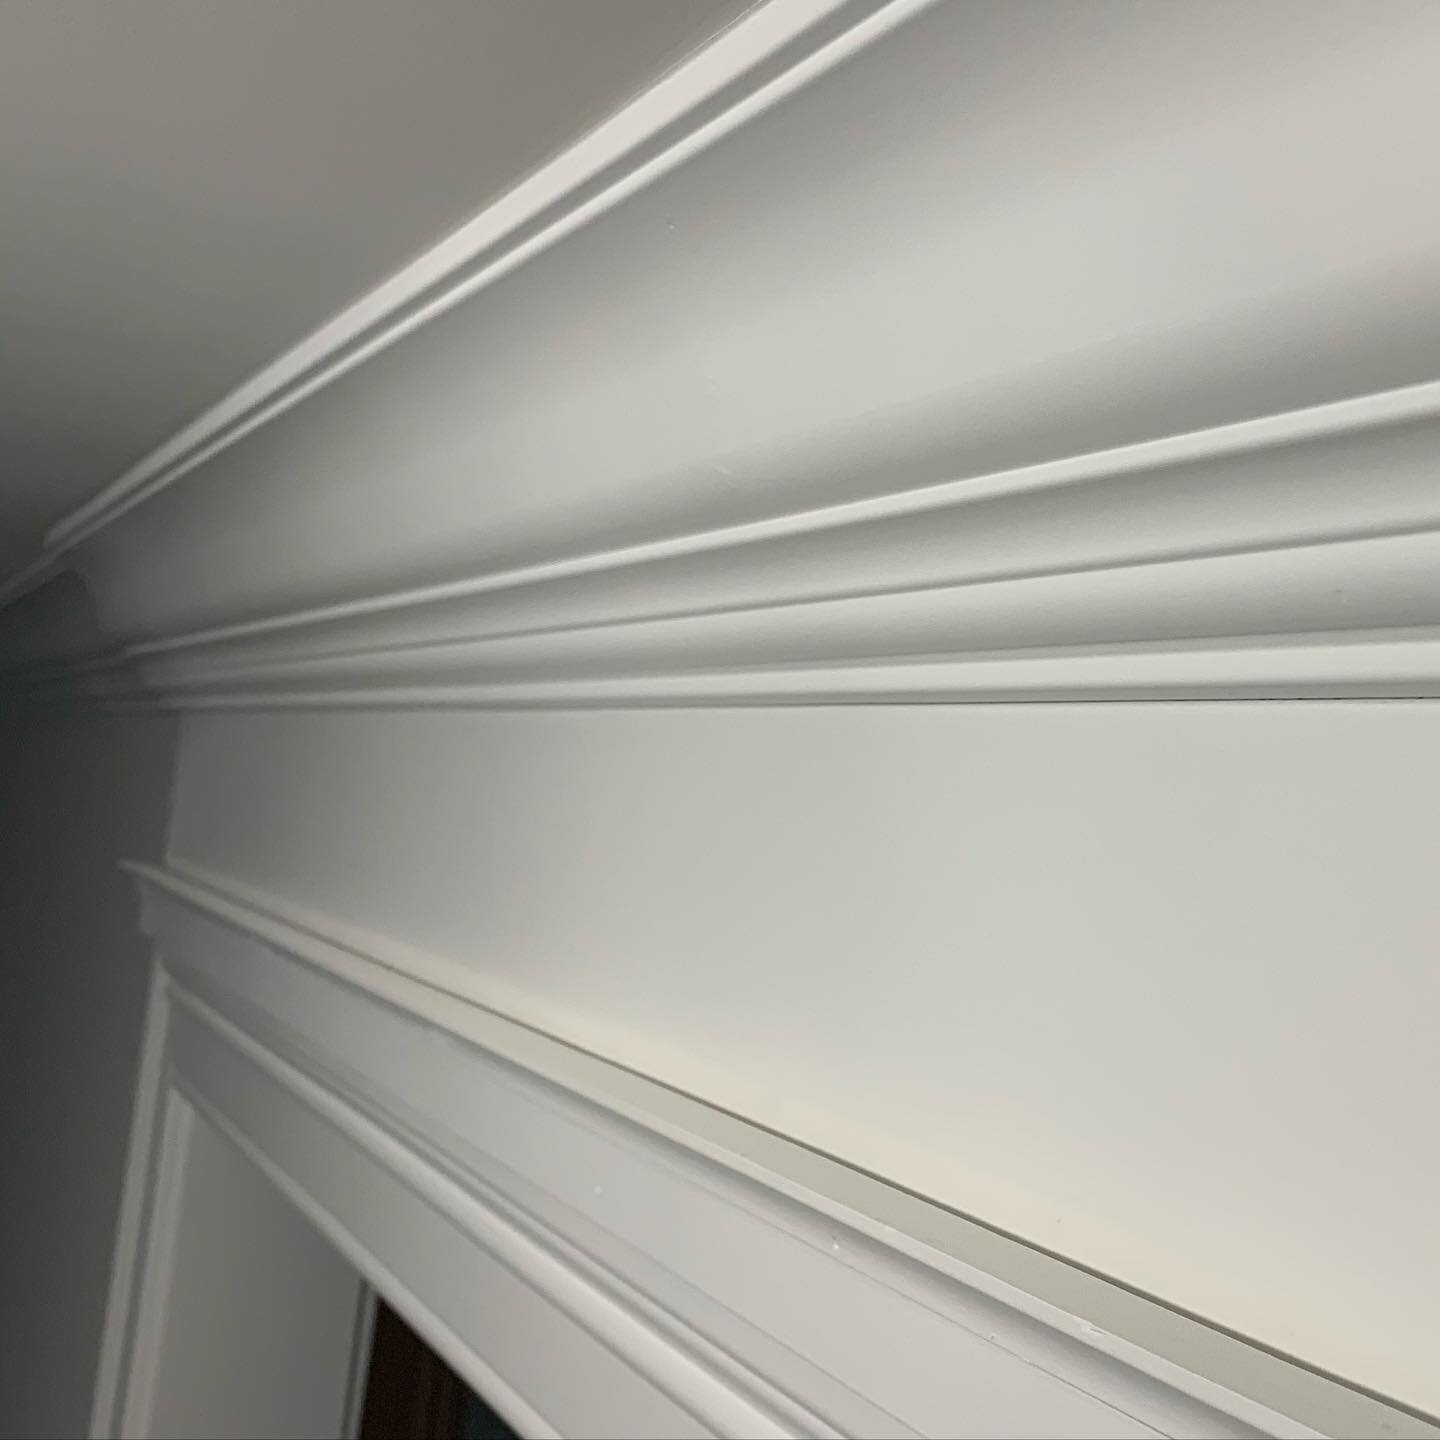 Some call it an obsession but the work pays off. Spray finish for the win #cloutierconstructionanddesign #keepcraftalive #custom #crownmolding #finishcarpentry #gracosprayer #benjaminmoorepaint #livingthedream